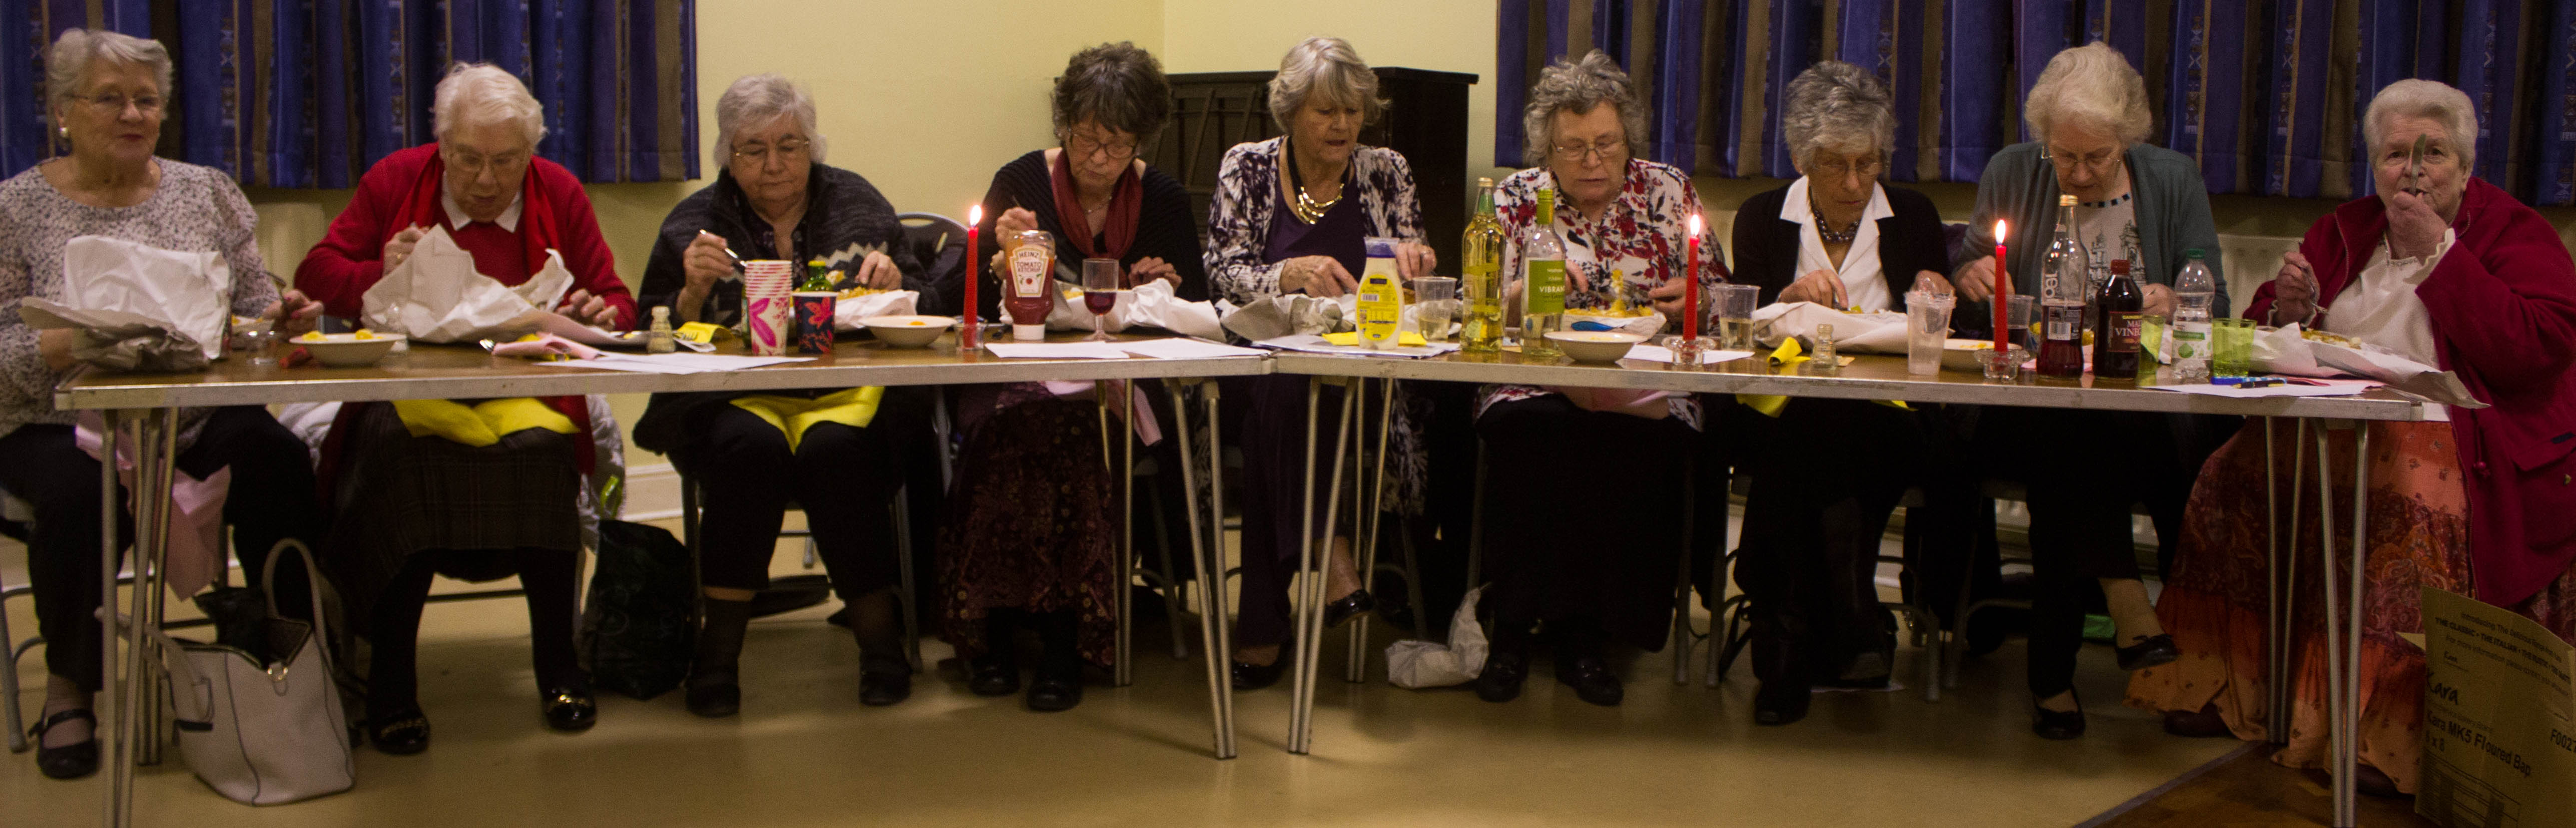 Some of the ladies of St Luke's enjoying their fish-and-chip suppers.